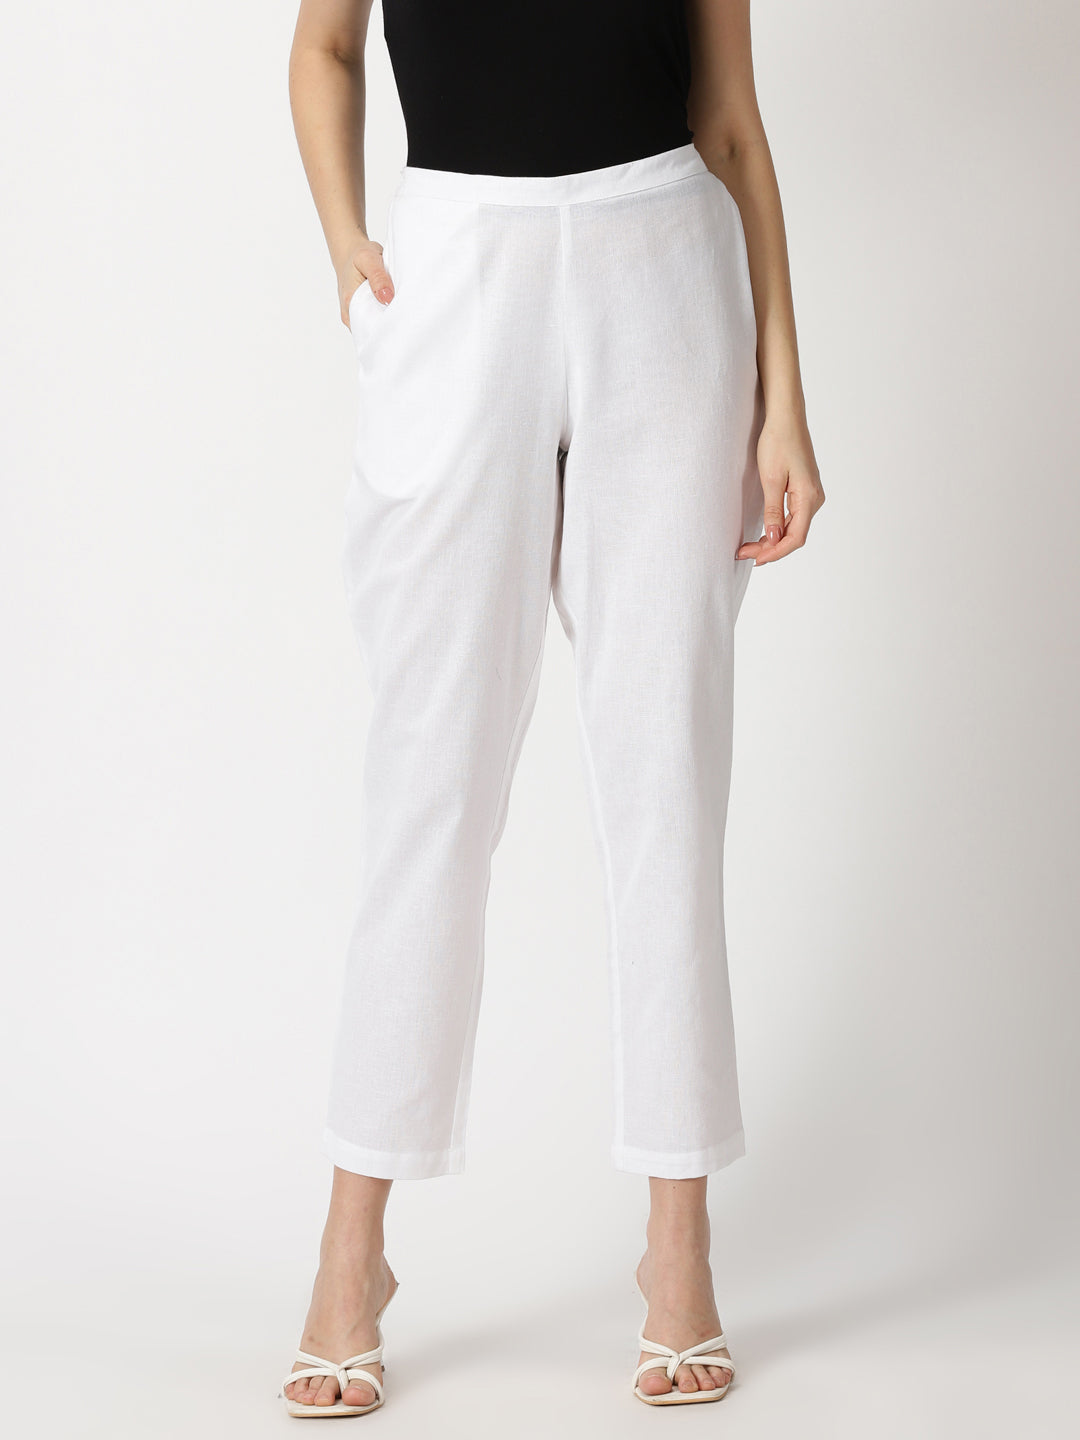 French Flax Linen Lounge Pant in Natural – I Love Linen